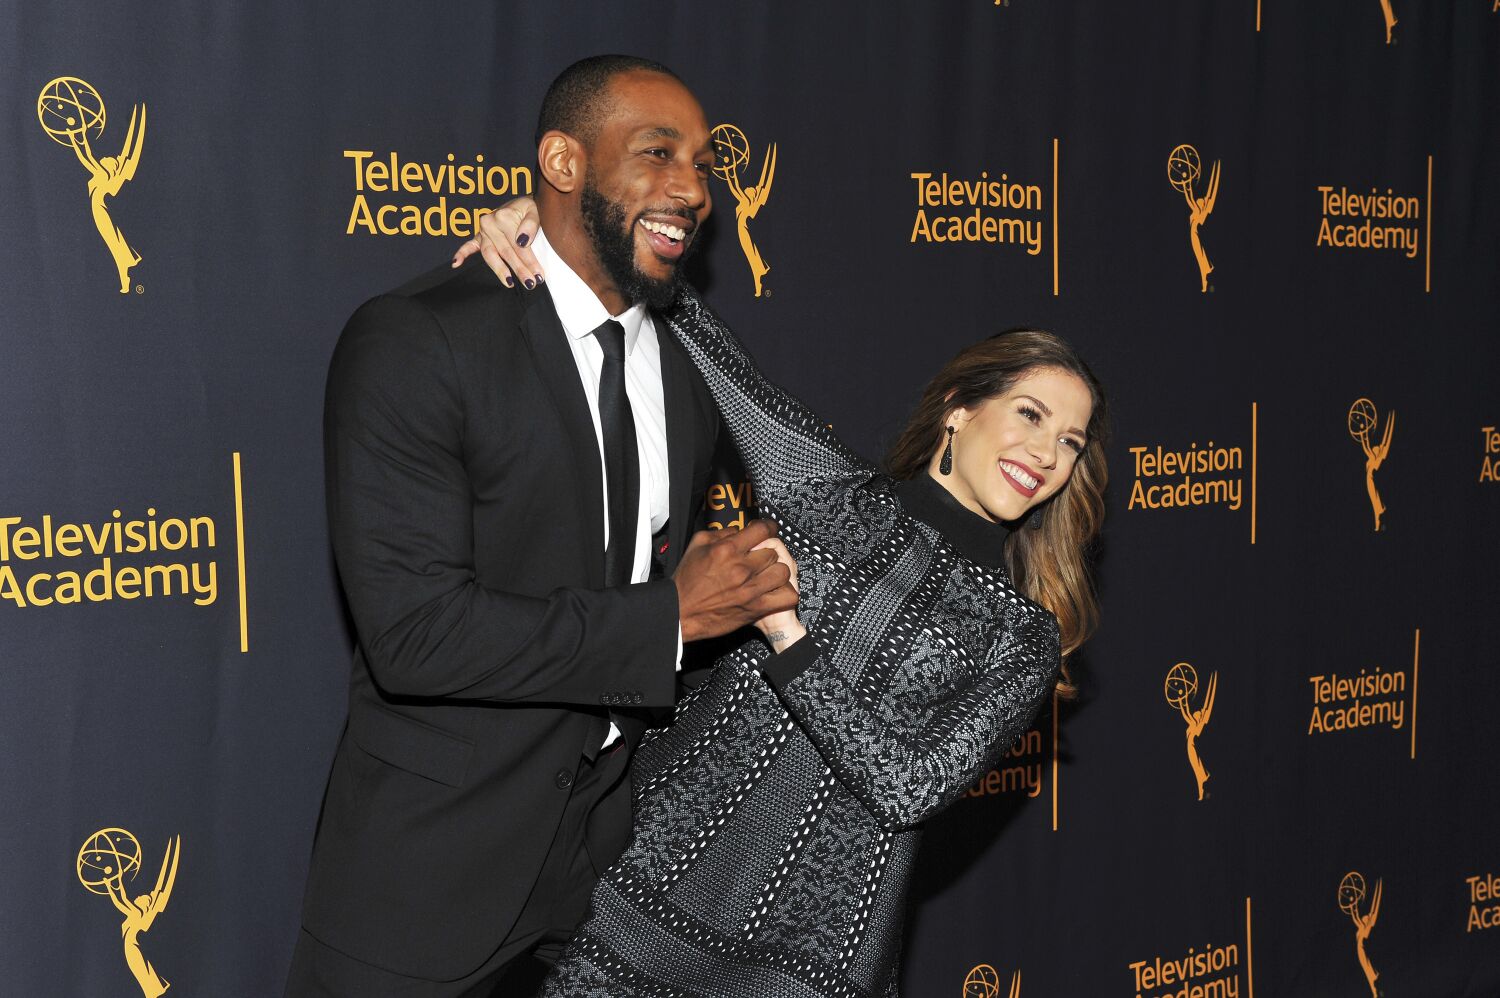 Twitch's wife and dance partner Allison Holker pays tribute: 'We love you'